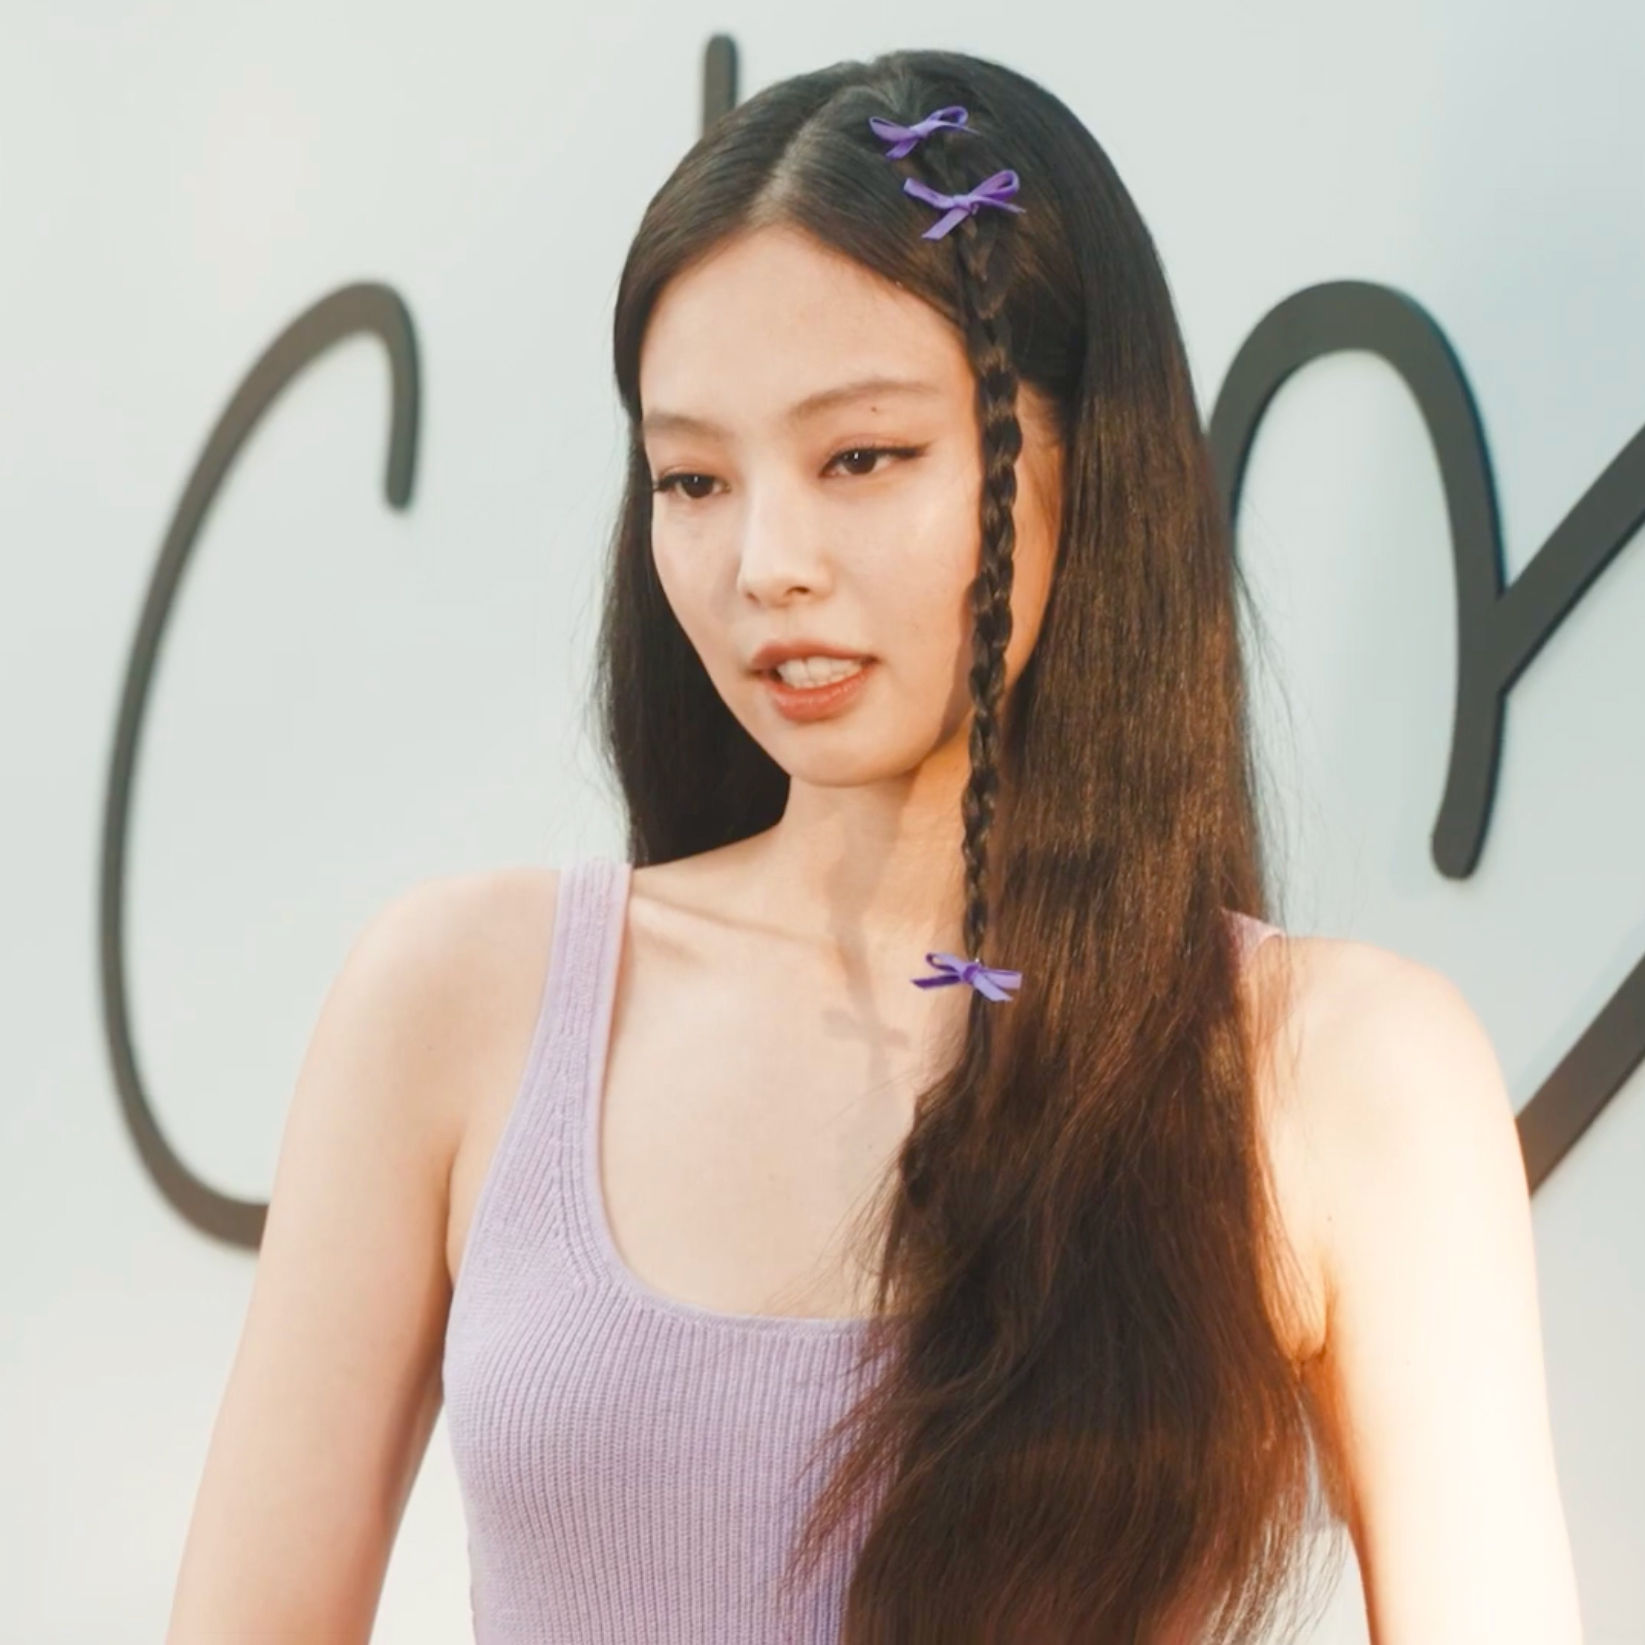 Recapping the the opening of Jennie for Calvin Klein in Seoul